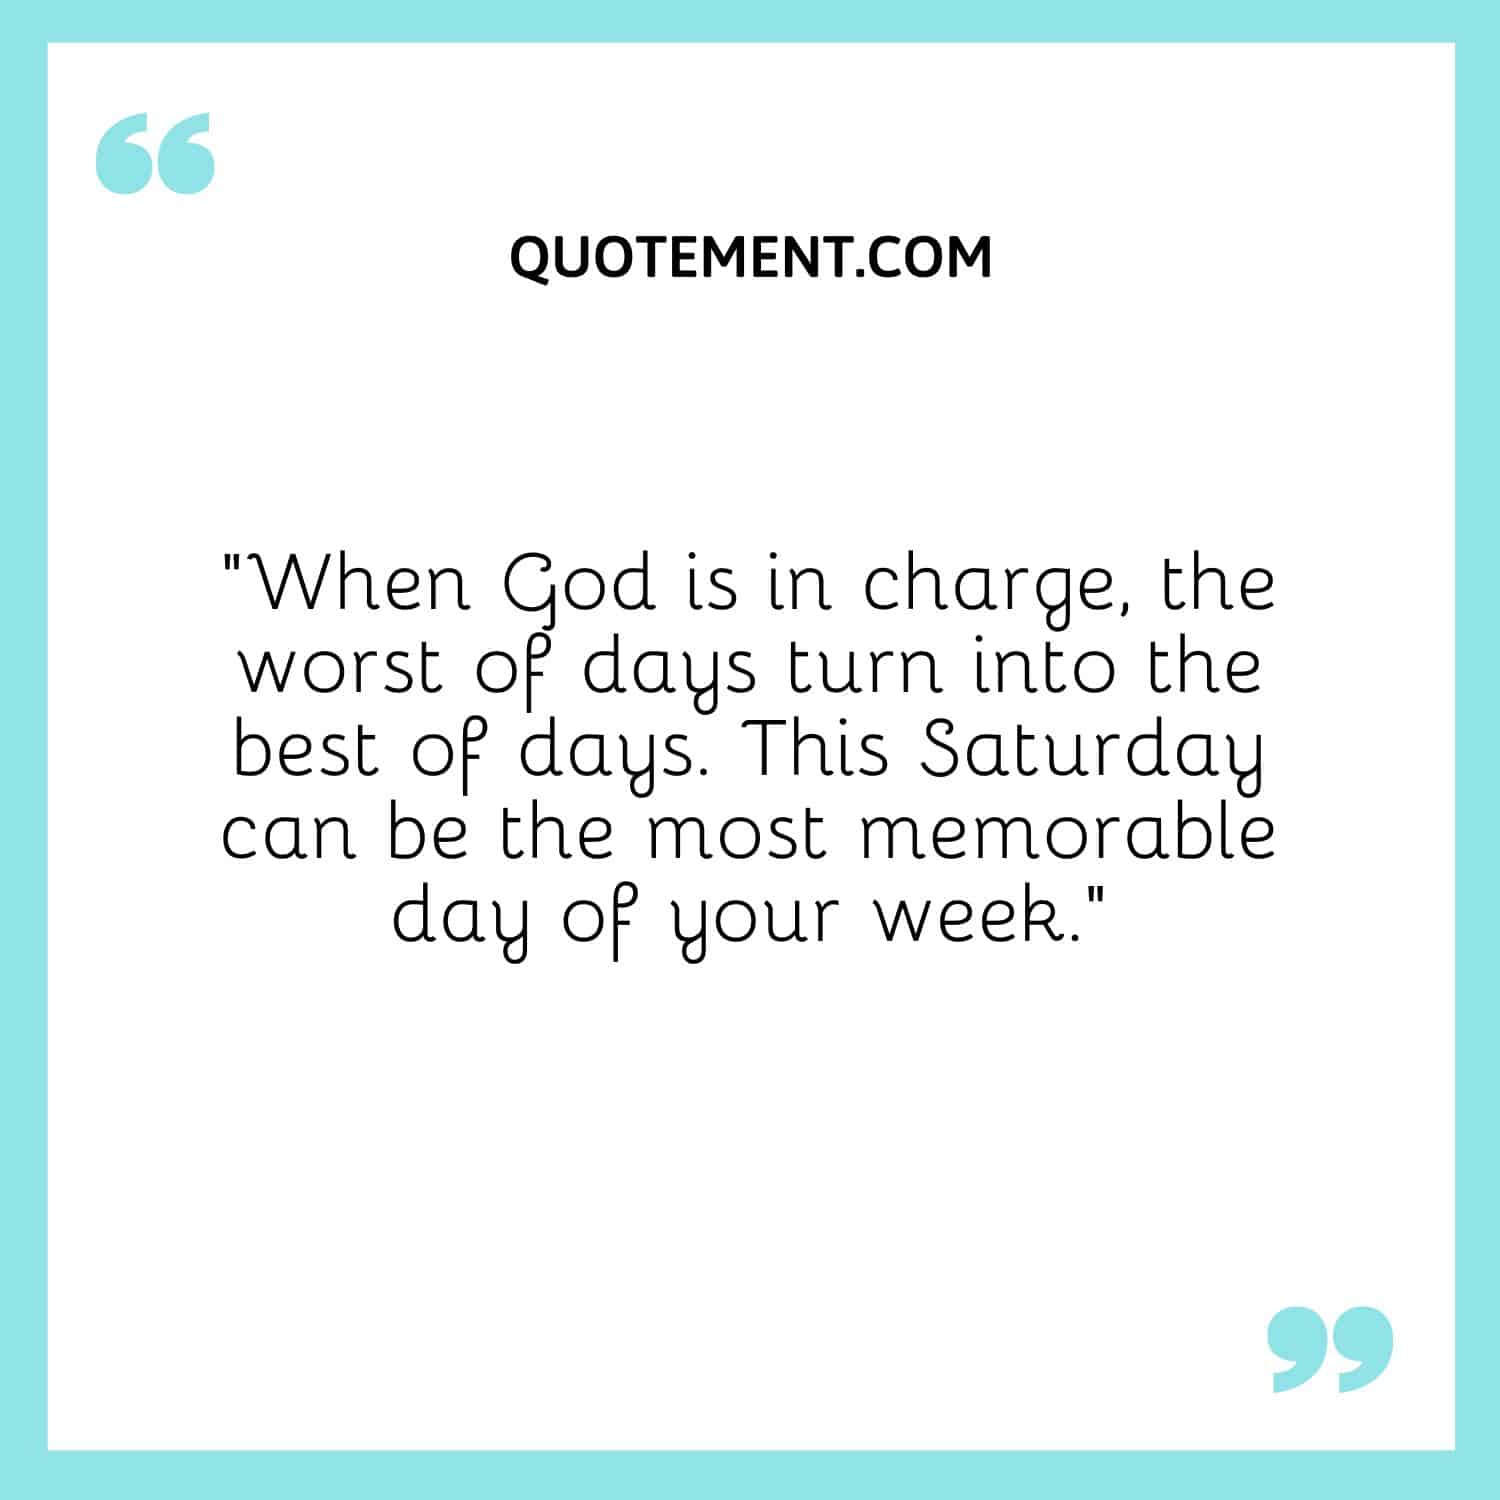 “When God is in charge, the worst of days turn into the best of days. This Saturday can be the most memorable day of your week.”